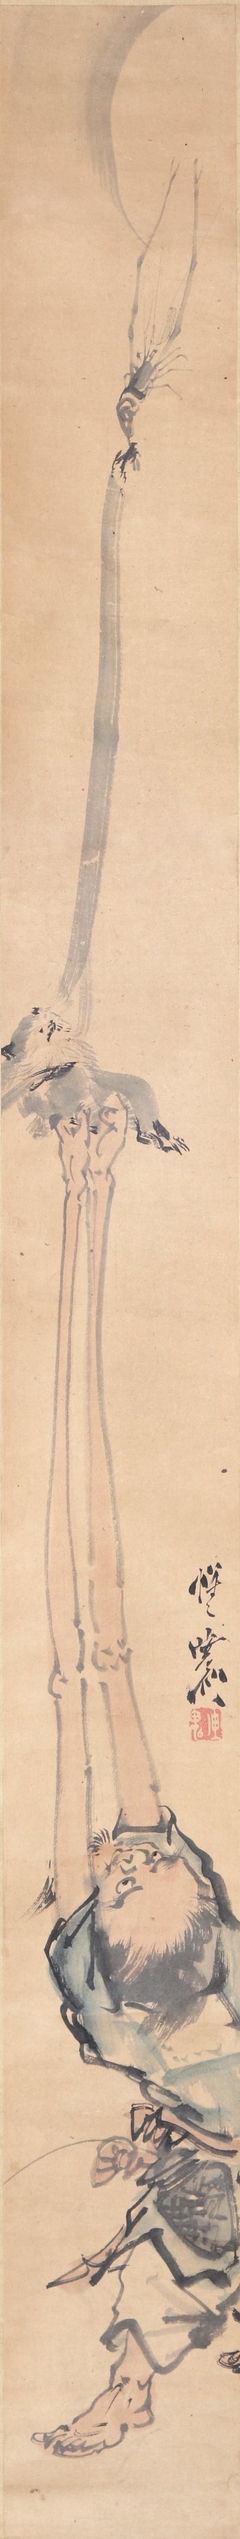 Long Arms [right of a pair of Long Legs and Long Arms] by Kawanabe Kyōsai